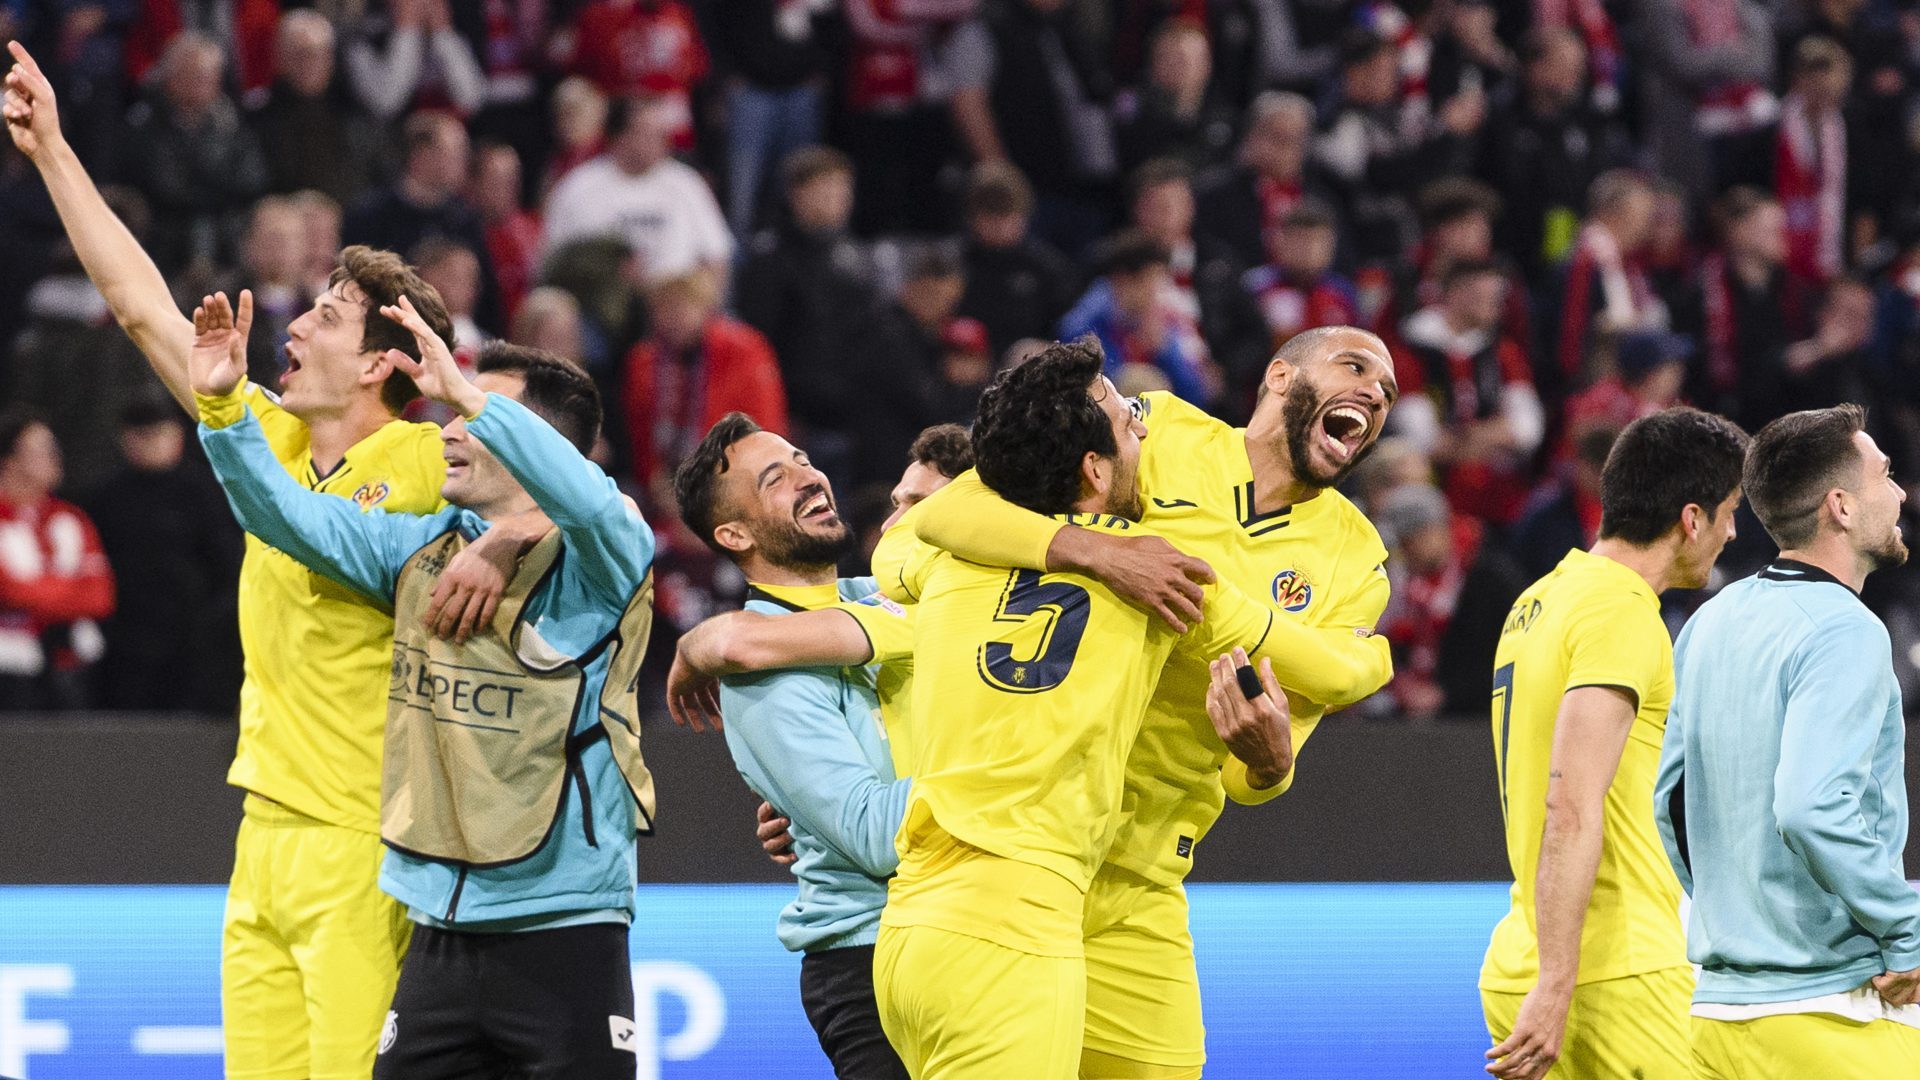 Villarreal players celebrate victory over Bayern Munich in the Champions League
(Photo: Getty Images)